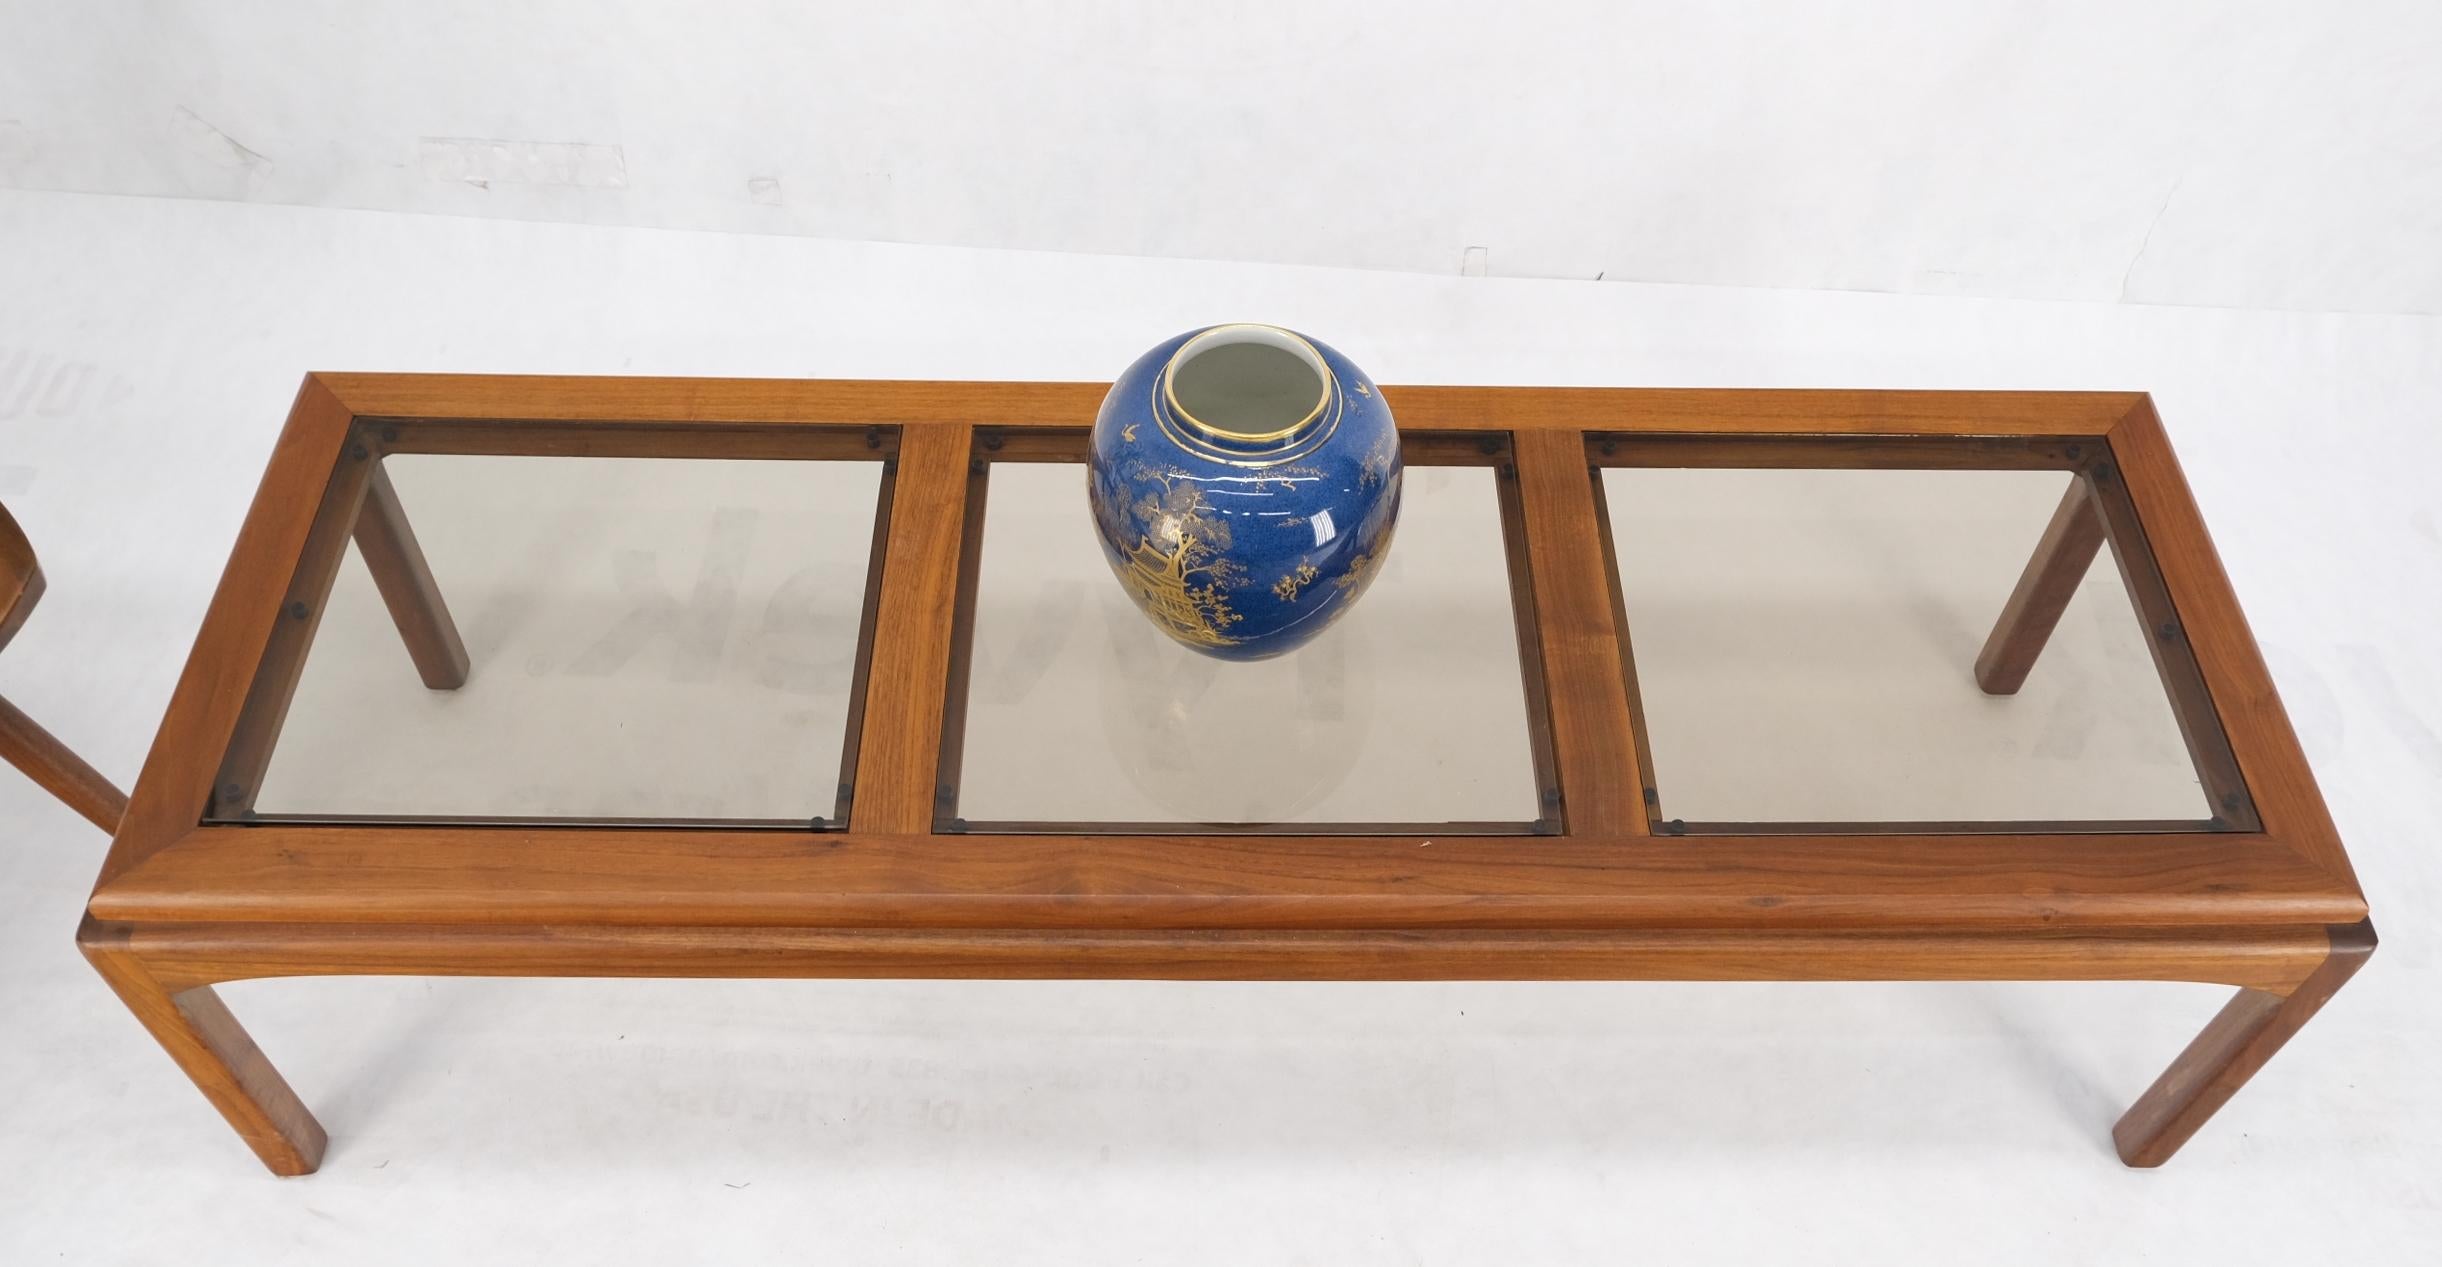 Large Rectangle 3 Smoked Glass Panes Top Solid Oiled Walnut Coffee Table MINT! For Sale 6